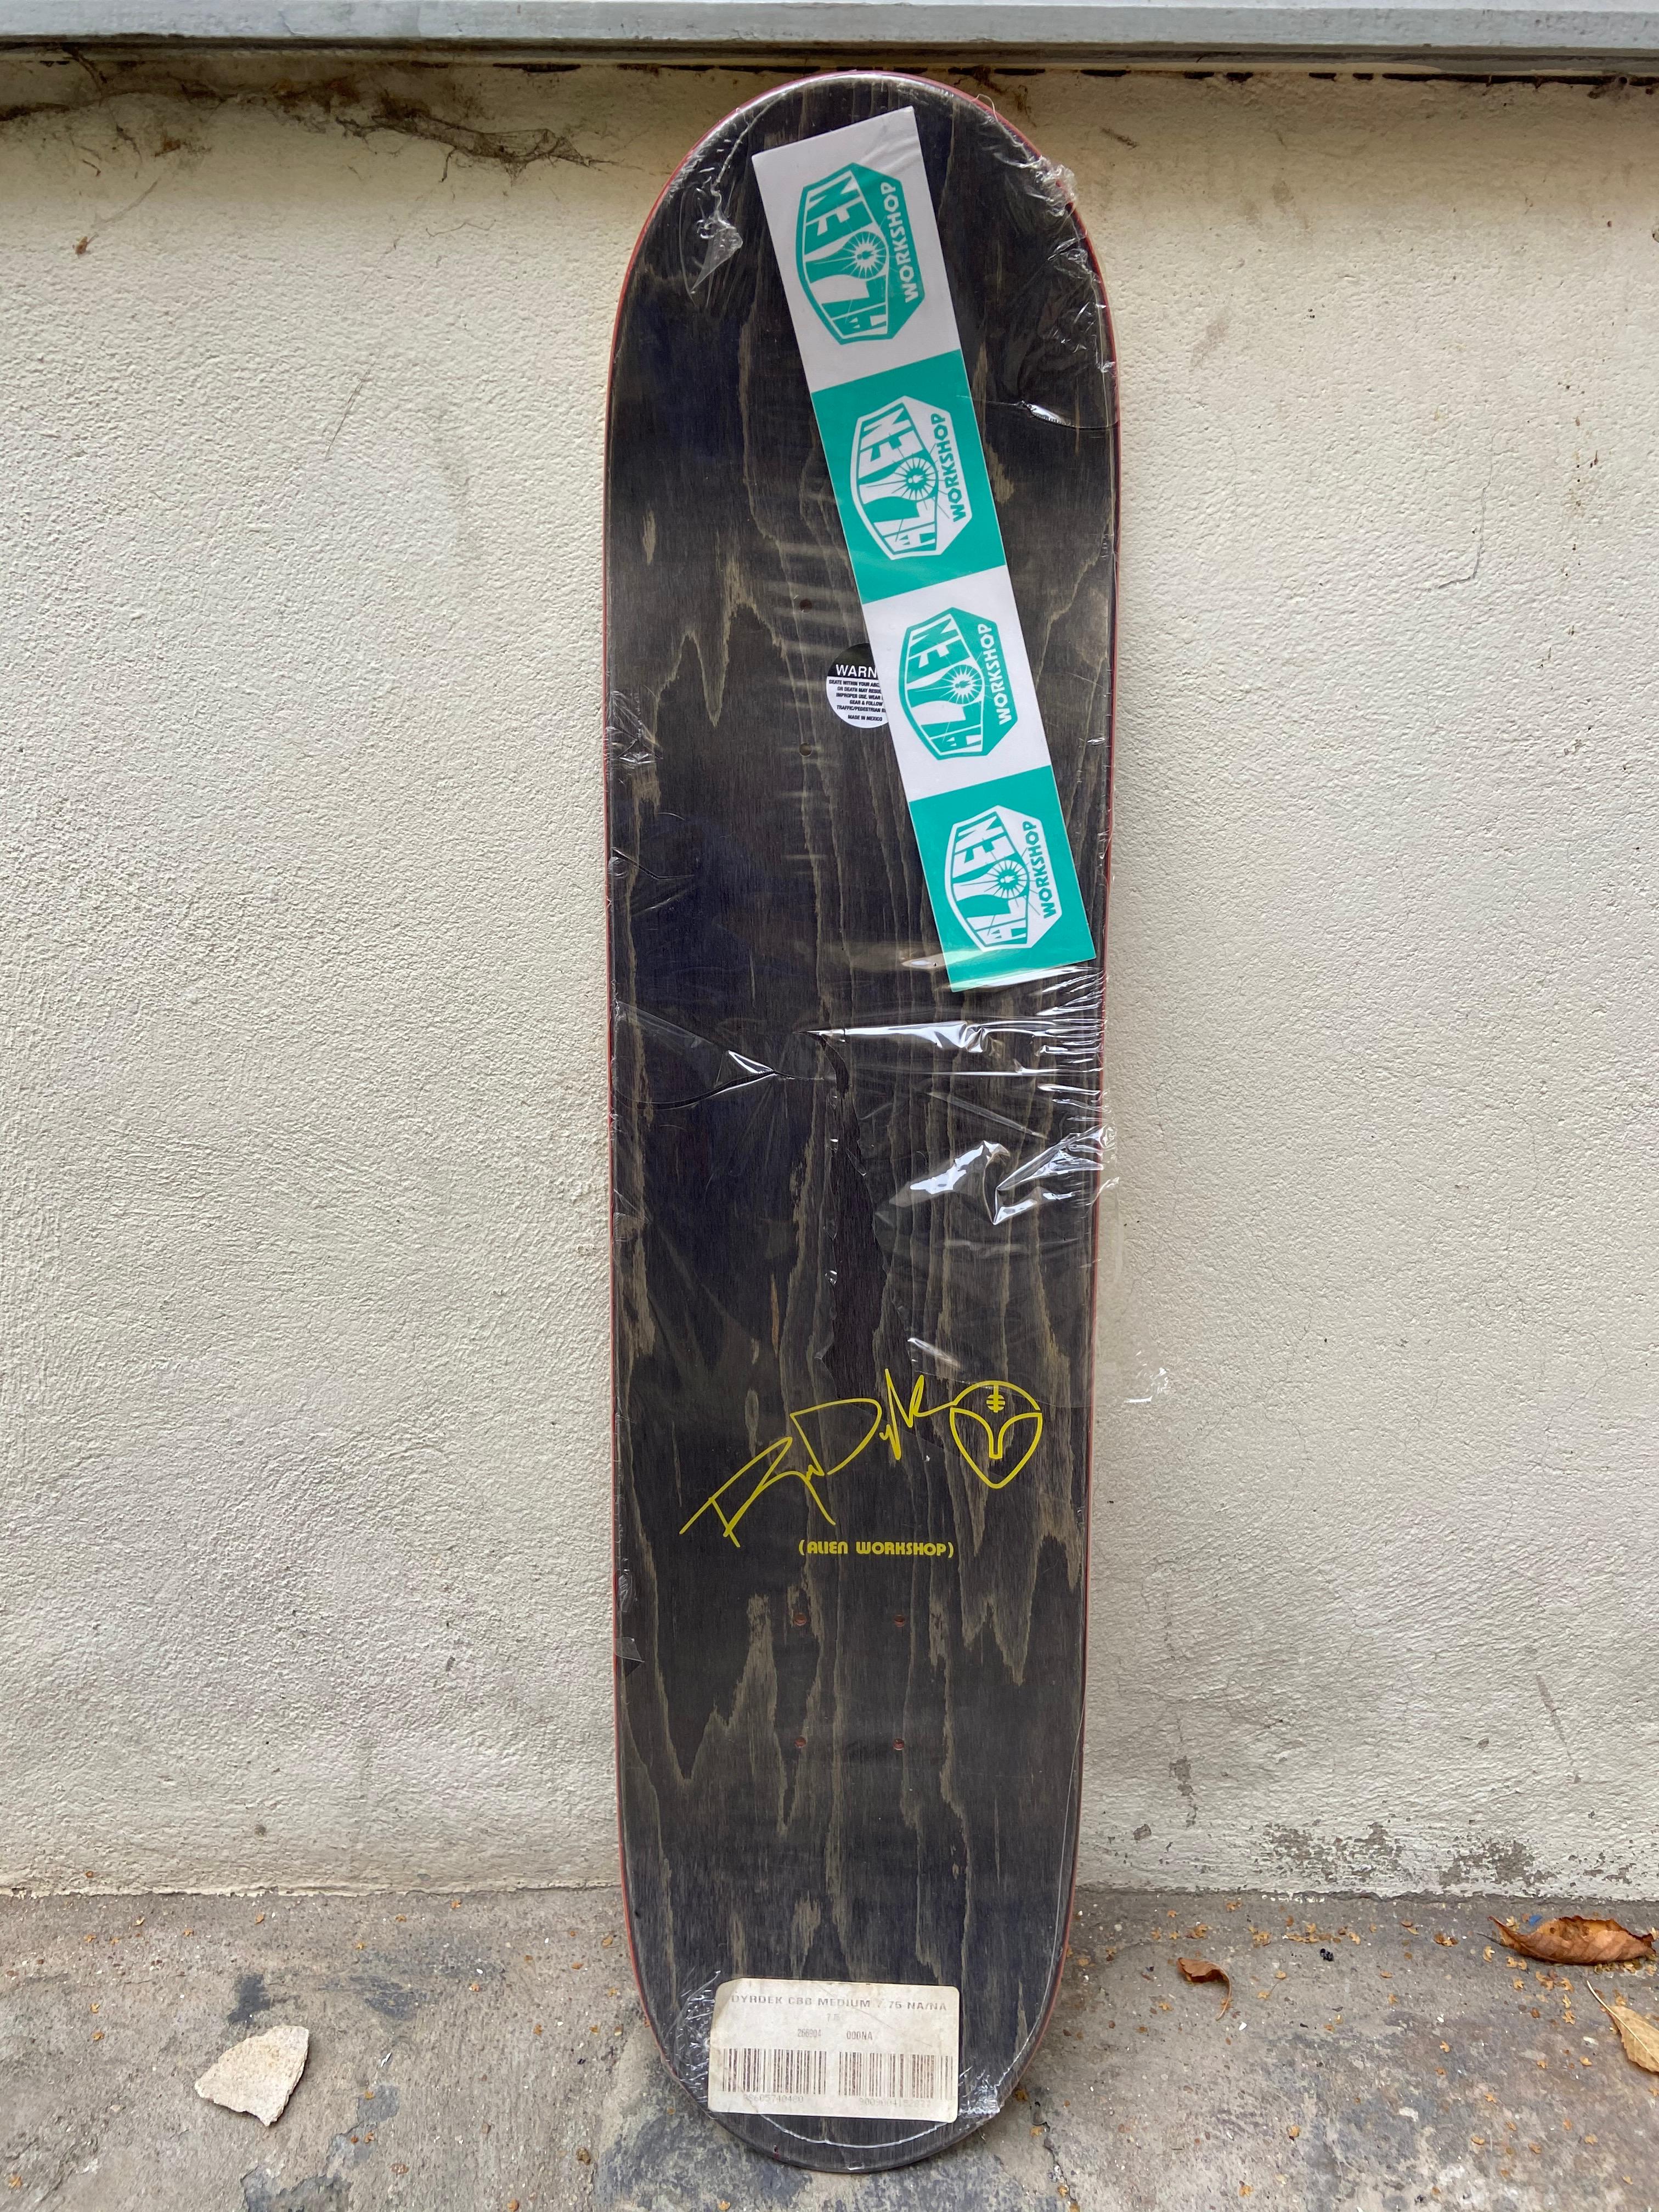 Dyrdek - Cant' be bothered model
Skate board Collector
Circa 2008
Front and back decoration
79.5 x 19.5 - size 7.75
Condition : New
390 euros.